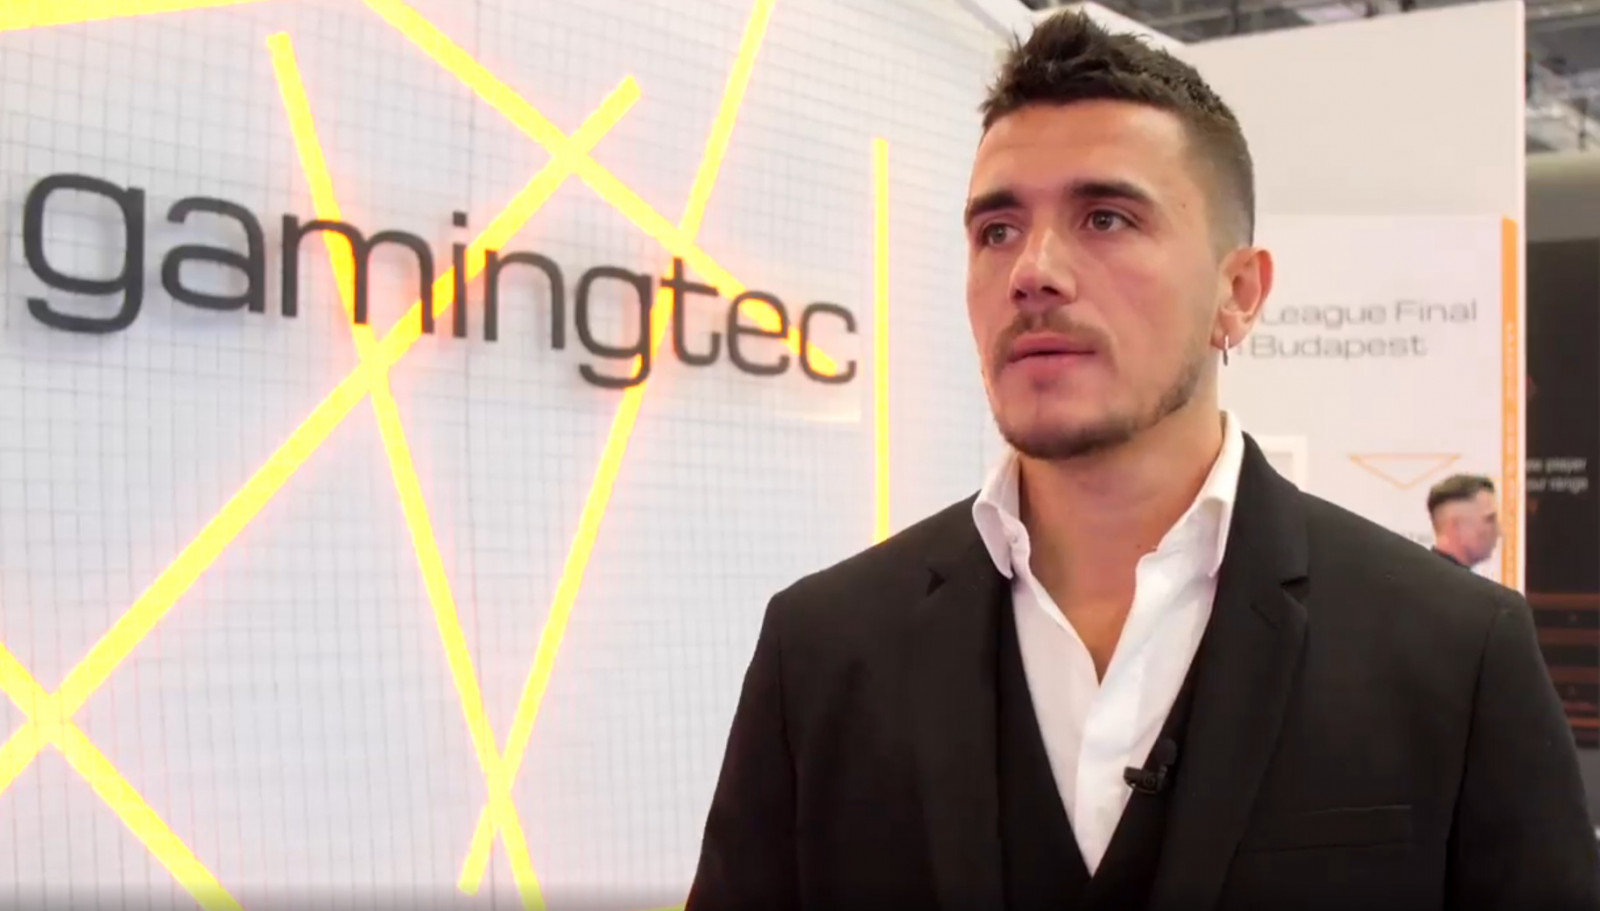 Hugo Nogueira speaks about clients and Gamingtec’s plans for 2023